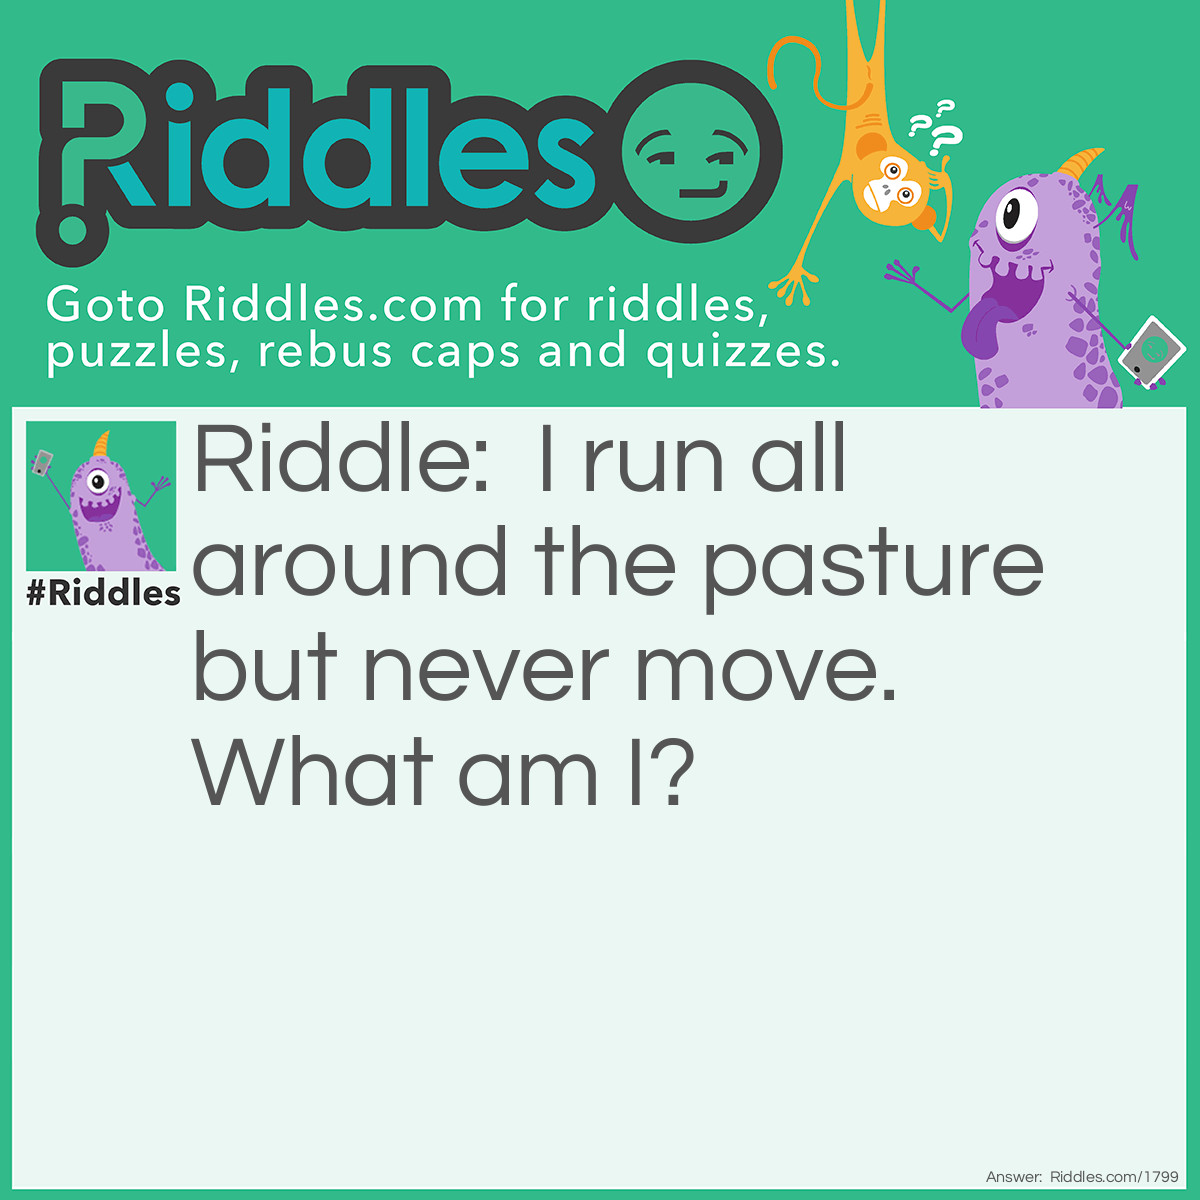 Riddle: I run all around the pasture but never move. What am I? Answer: A fence.